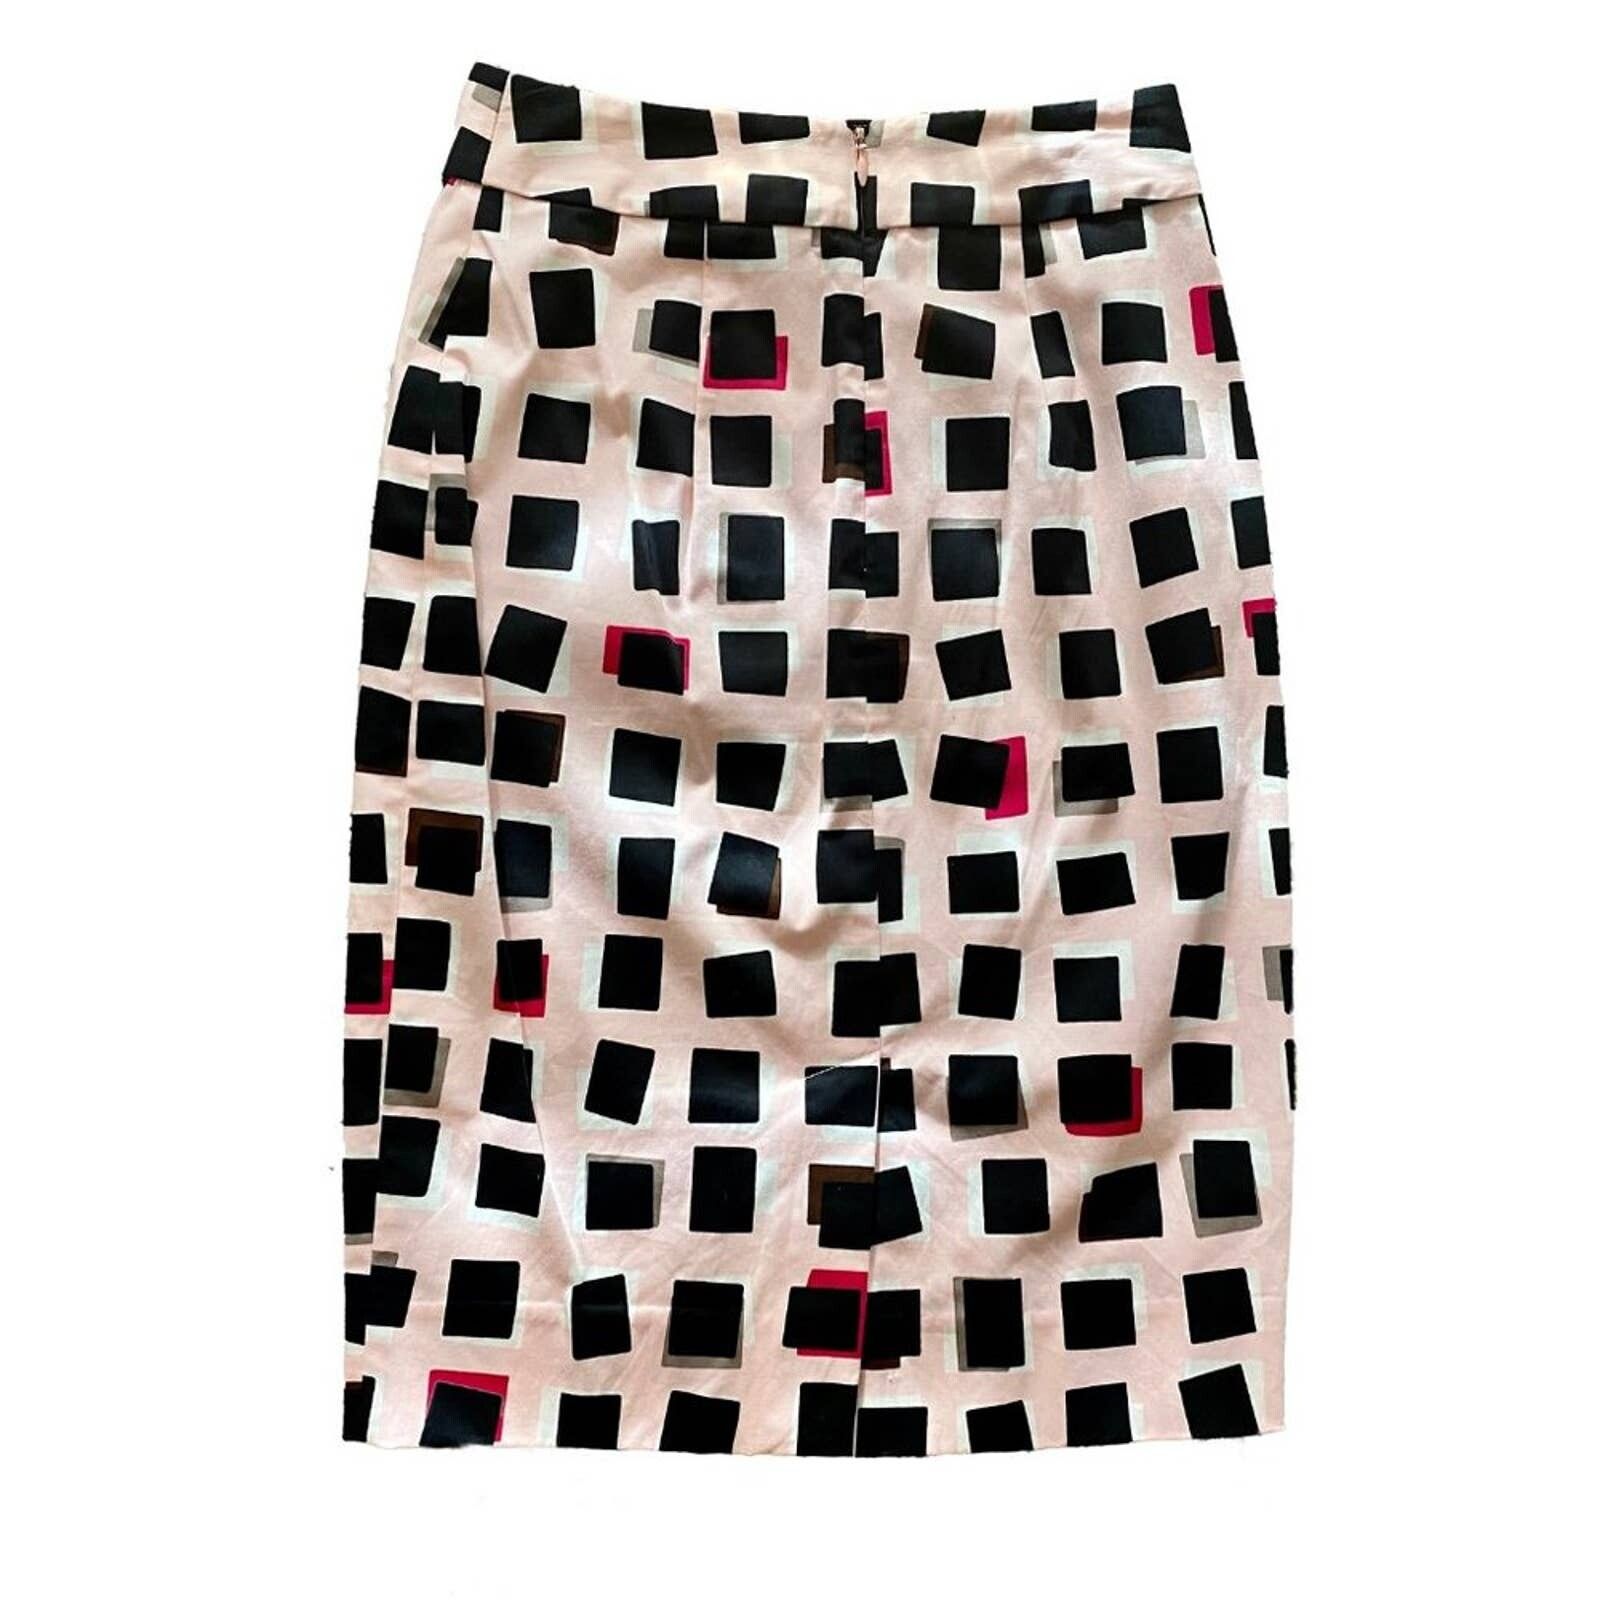 Kate Spade Kate Spade skirt the rules skirt Size 24" / US 00 / IT 34 - 1 Preview